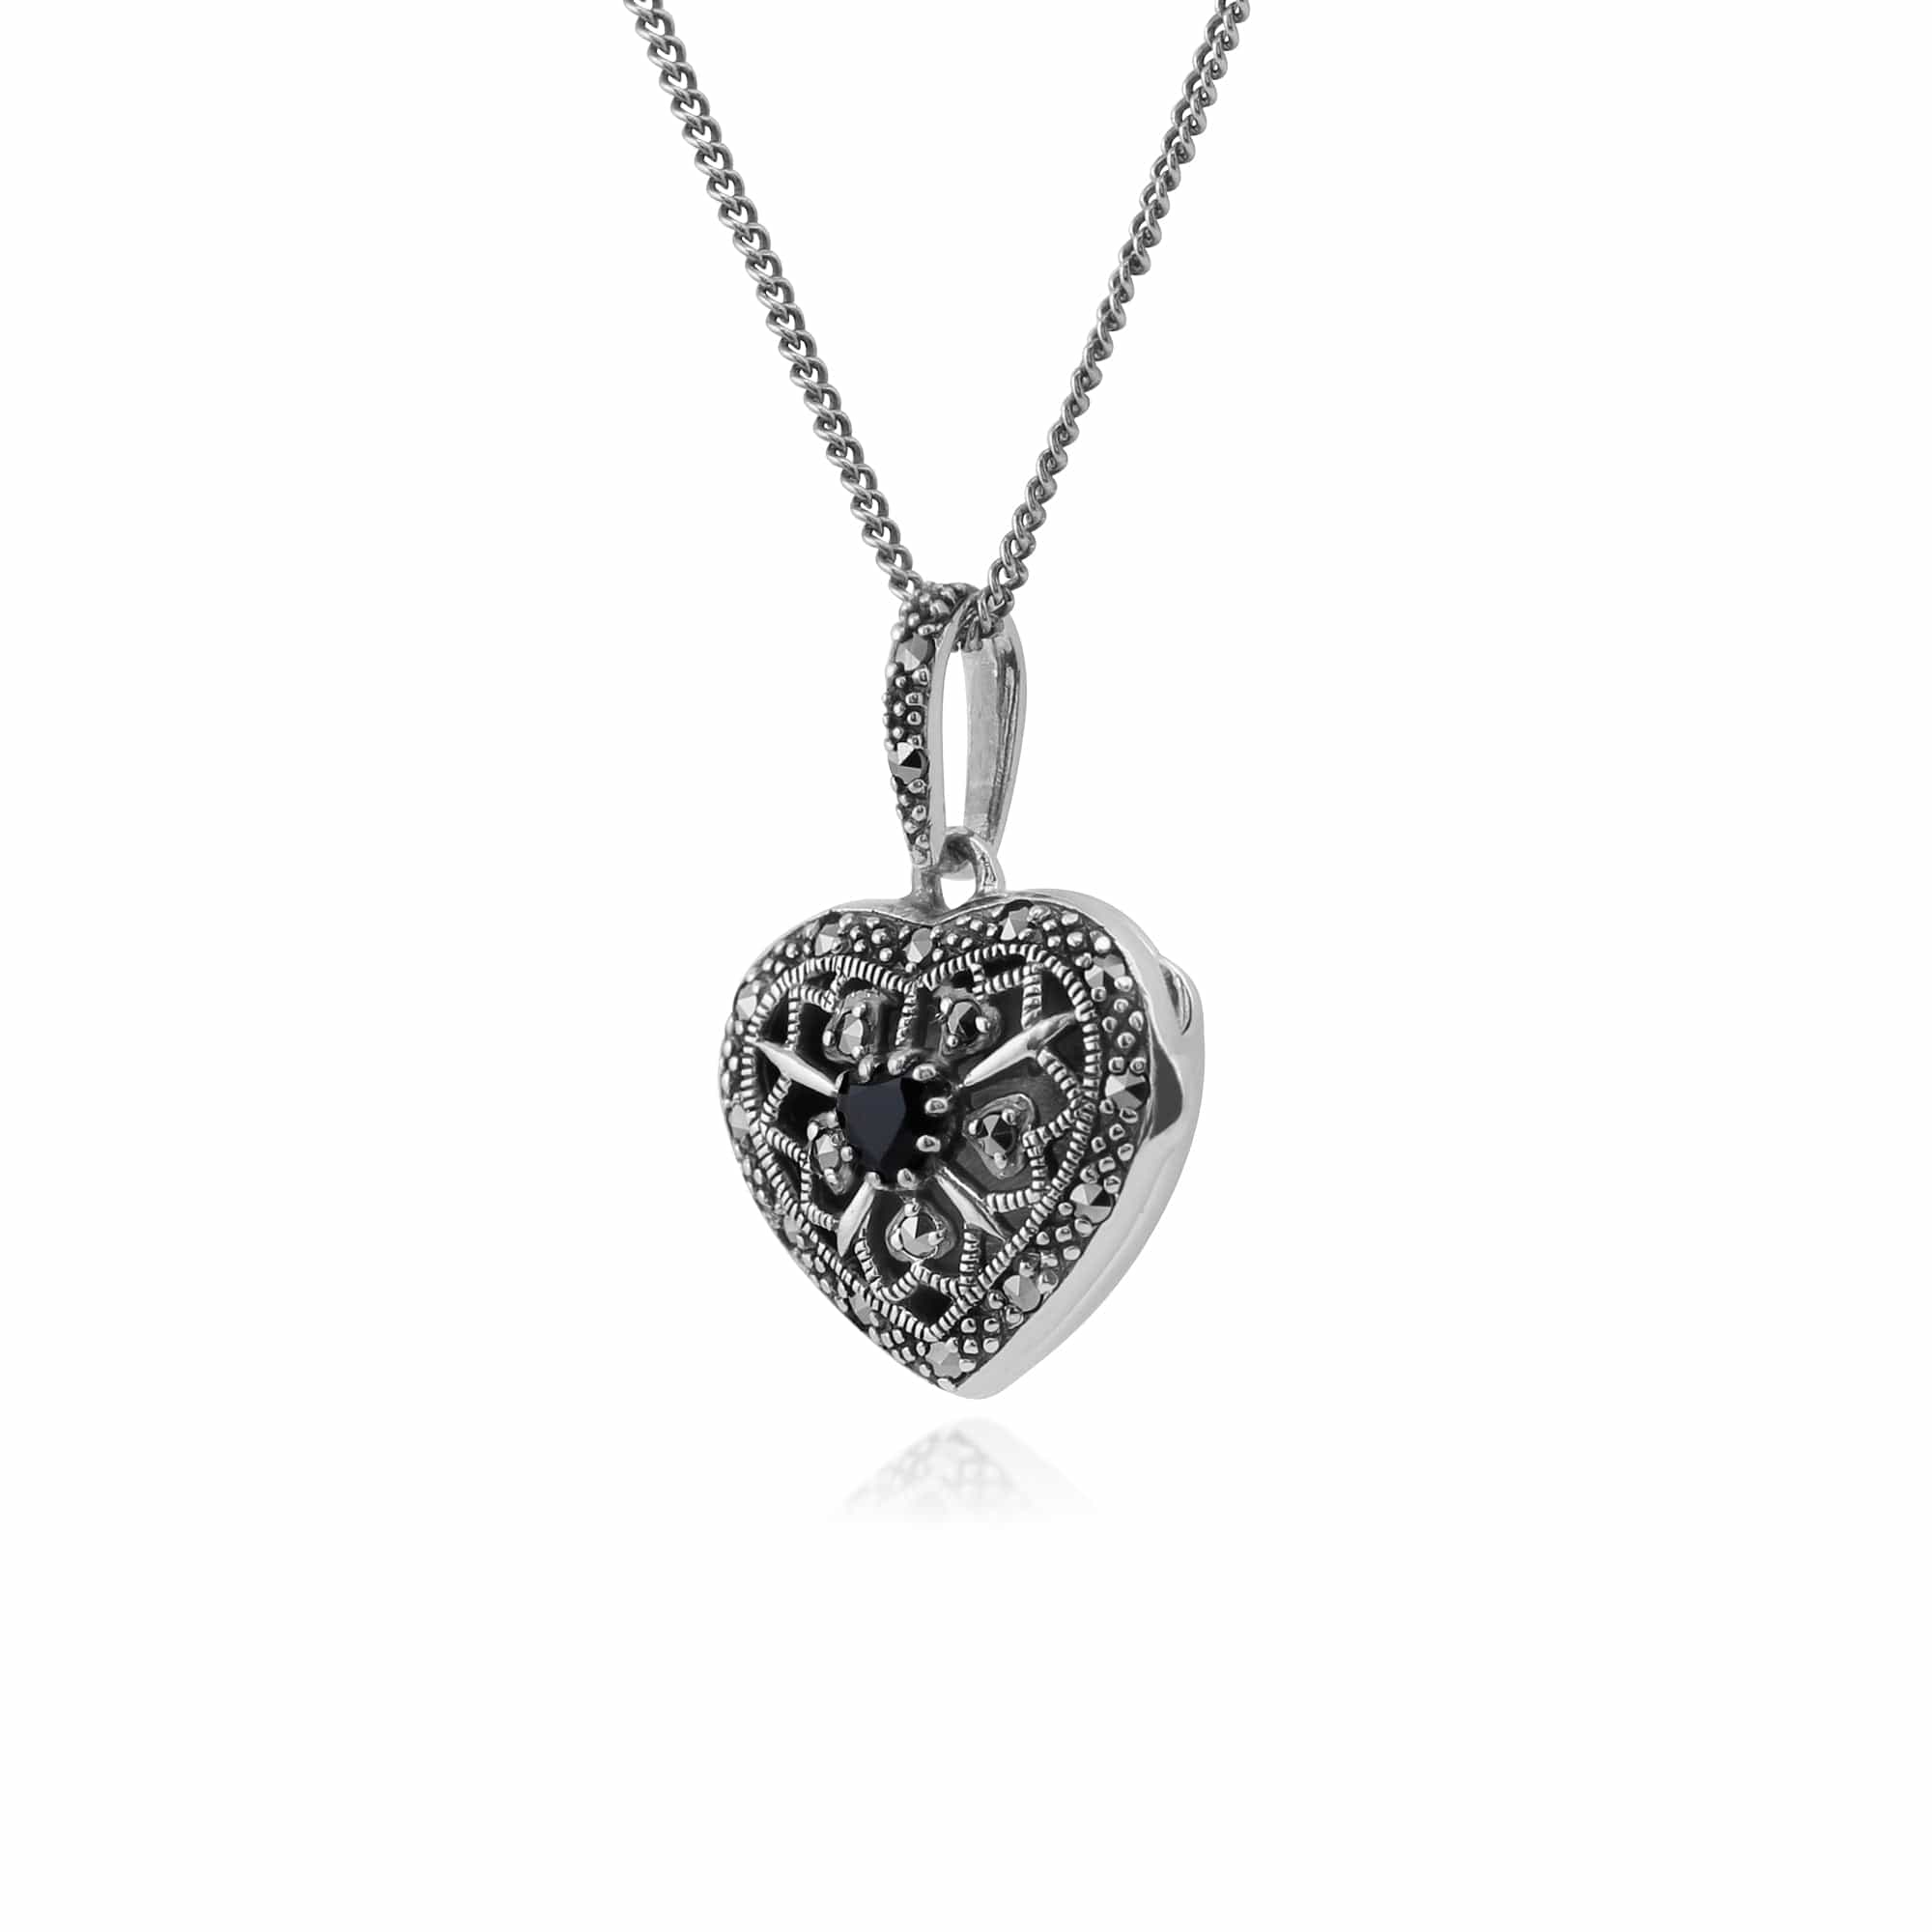 214N461912925 Art Nouveau Style Round Sapphire & Marcasite Heart Necklace in 925 Sterling Silver 3